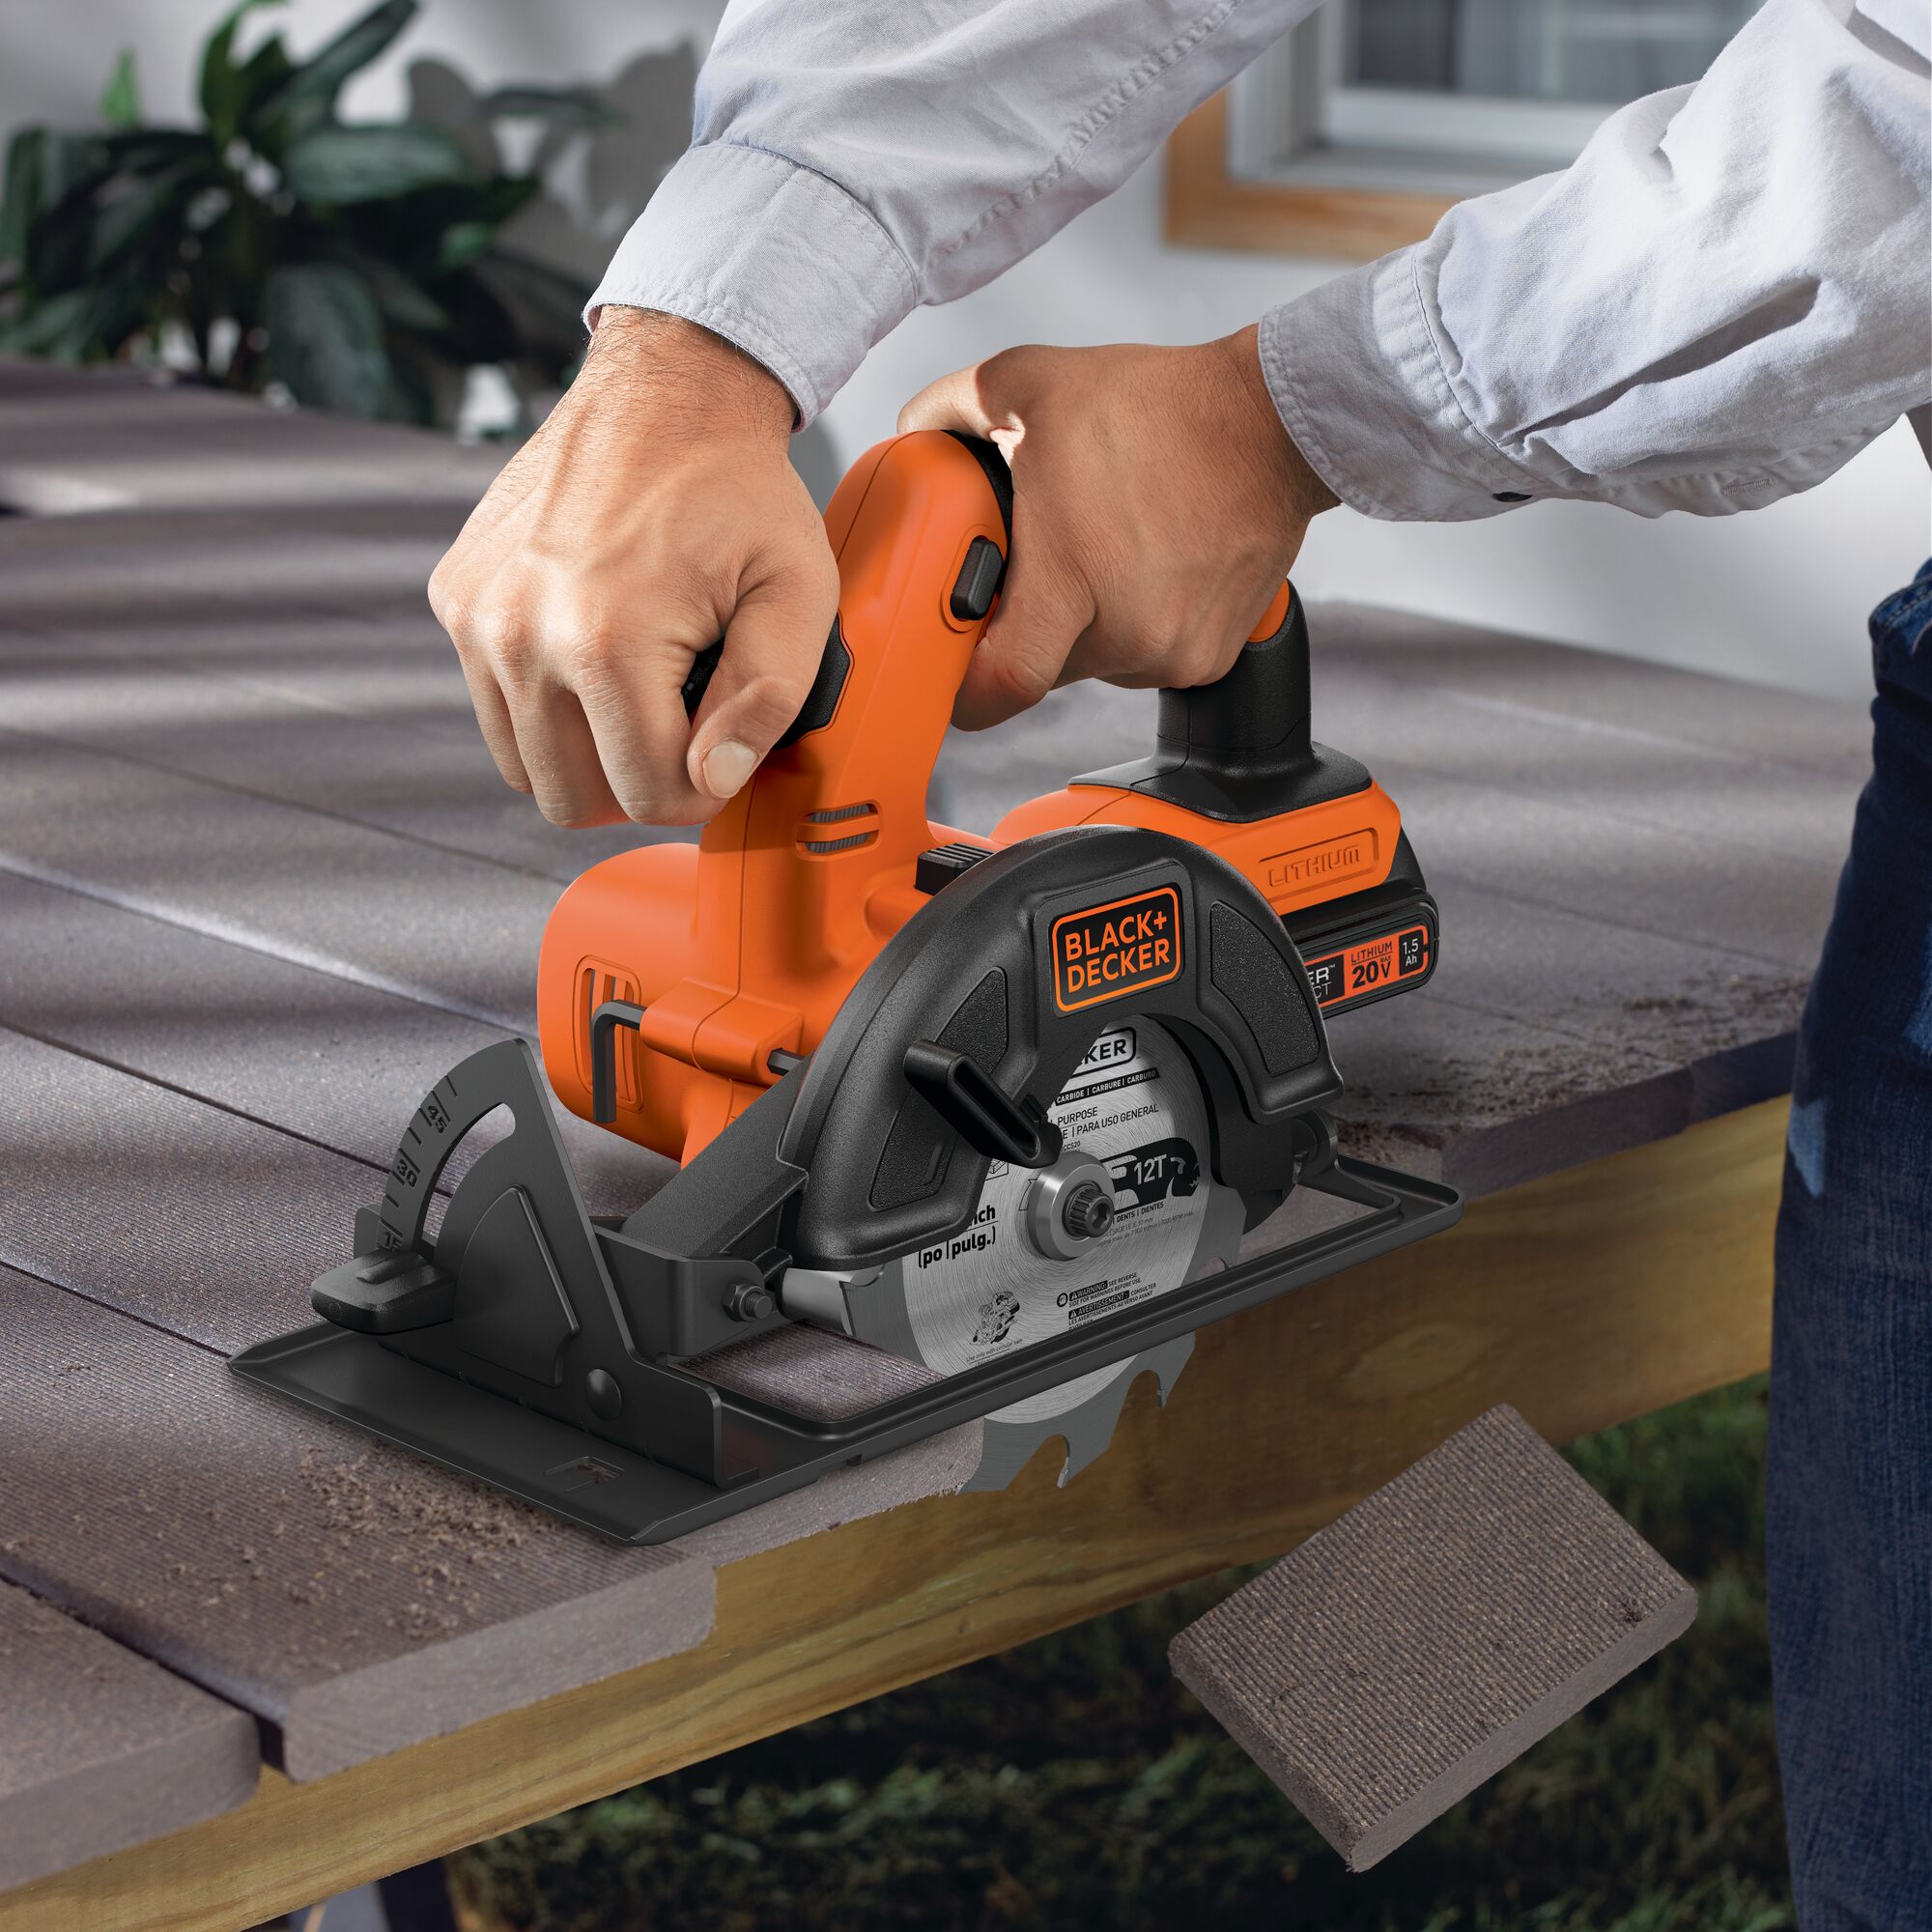 Black and decker 20 volt max lithium ion cordless circular saw being used to cut hard material